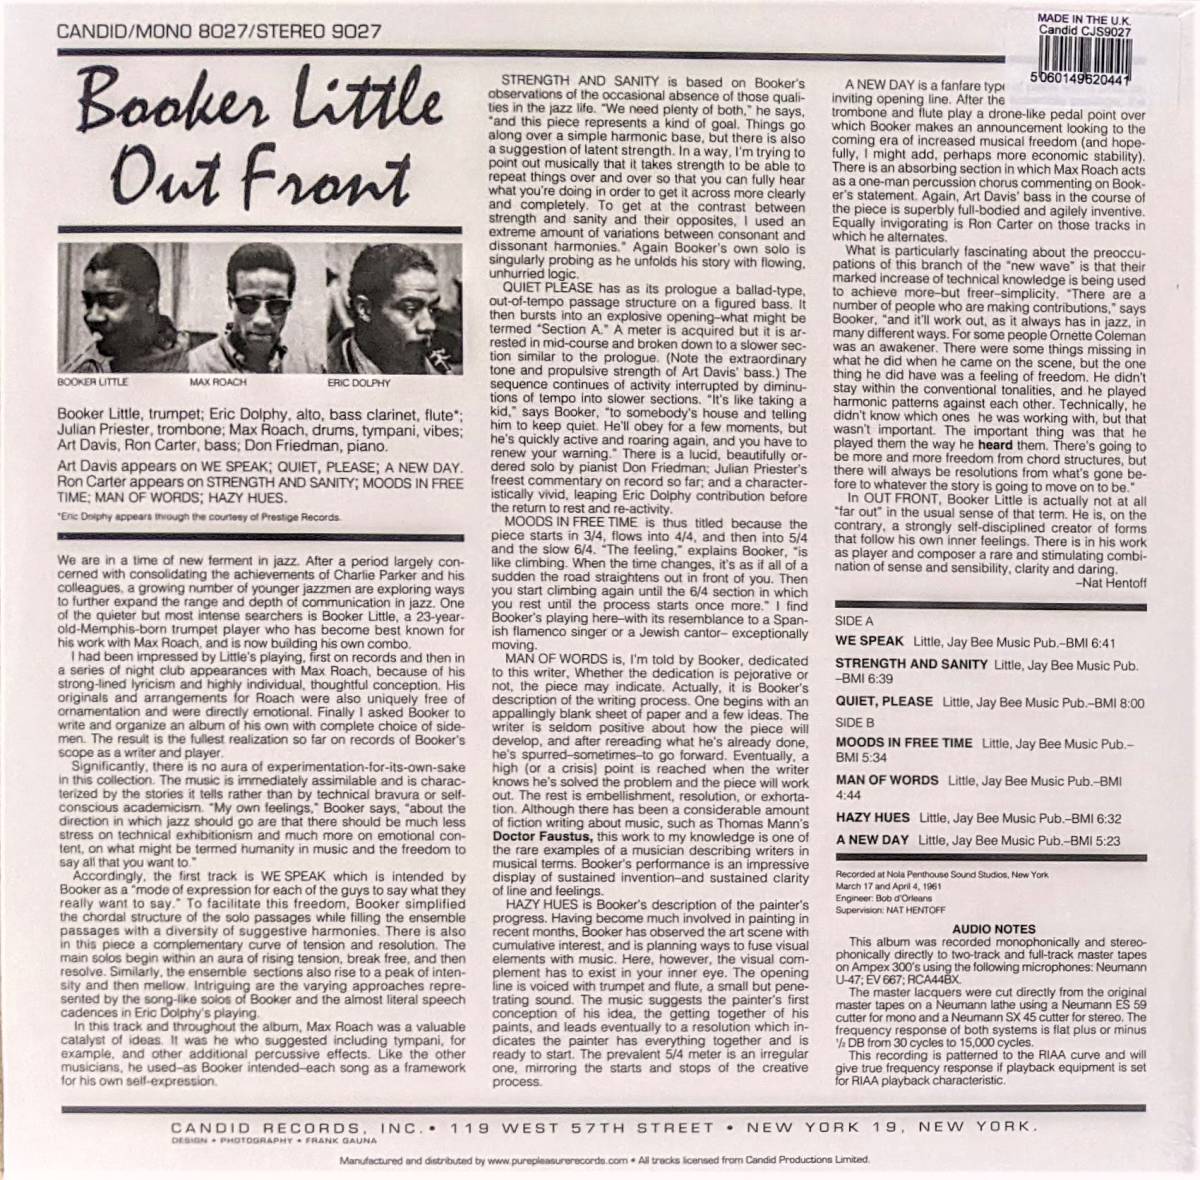 Booker Little ブッカー・リトル Featuring Eric Dolphy エリック・ドルフィー Out Front 限定リマスター再発Audiopileアナログ・レコード 